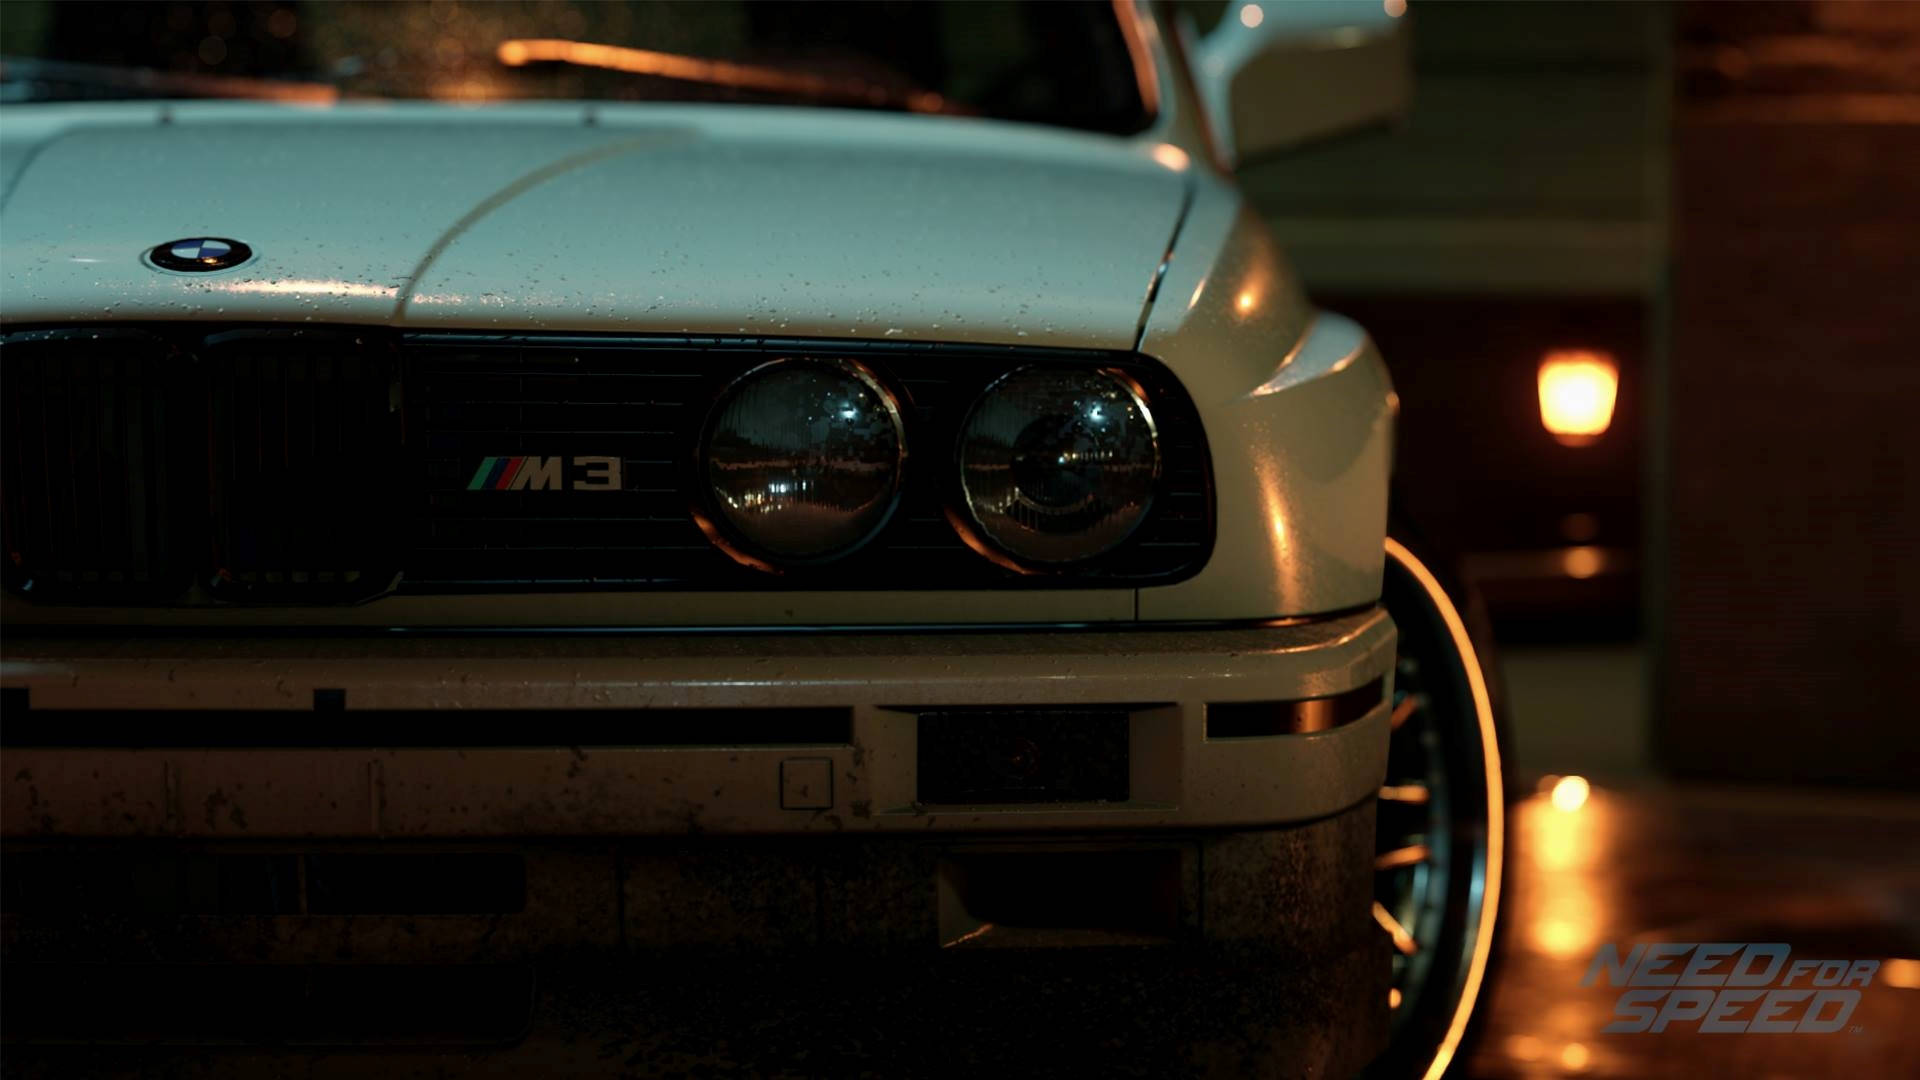 Free Need For Speed Wallpaper Downloads, [100+] Need For Speed Wallpapers  for FREE 